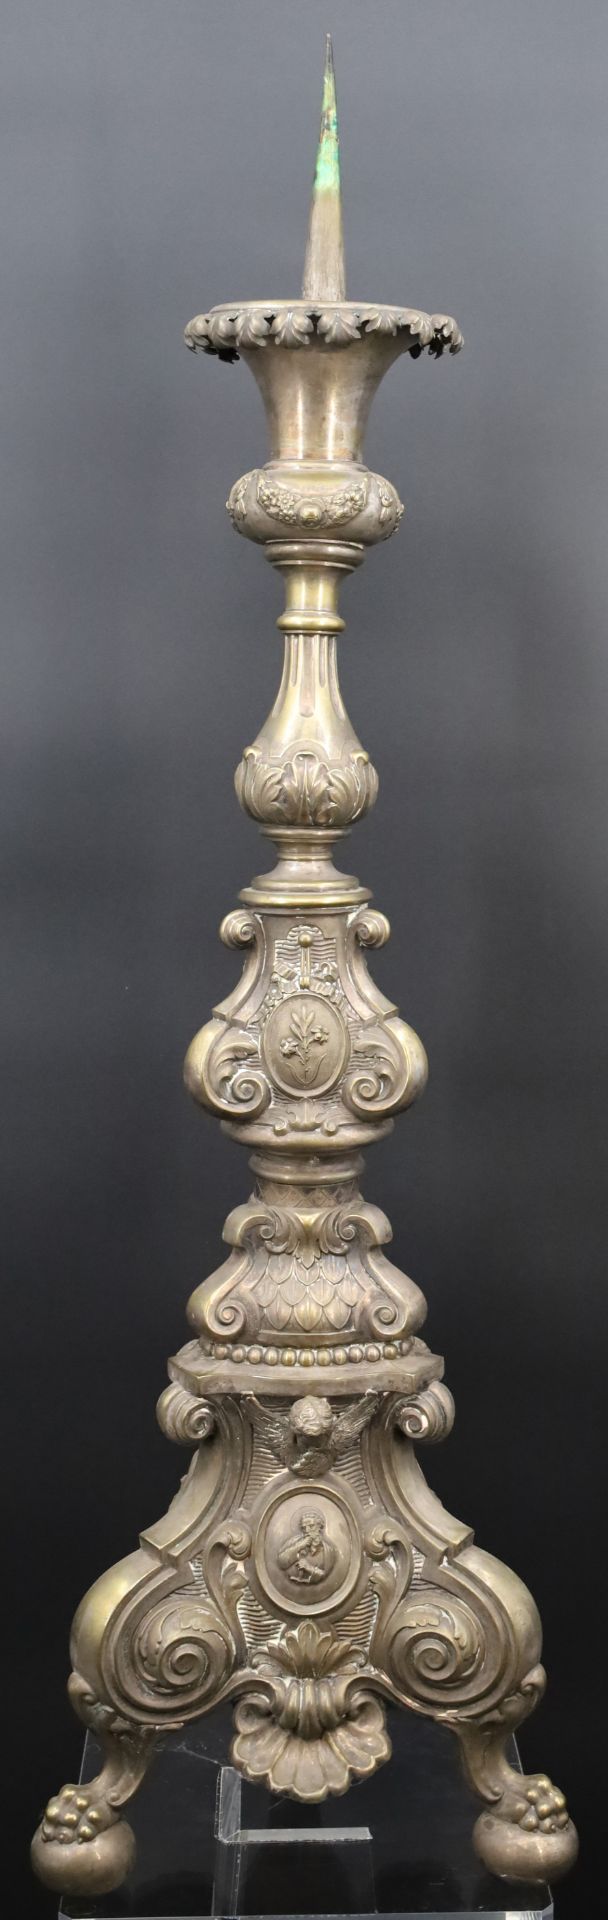 Altar candlestick. Torch. Around 1900. - Image 2 of 14